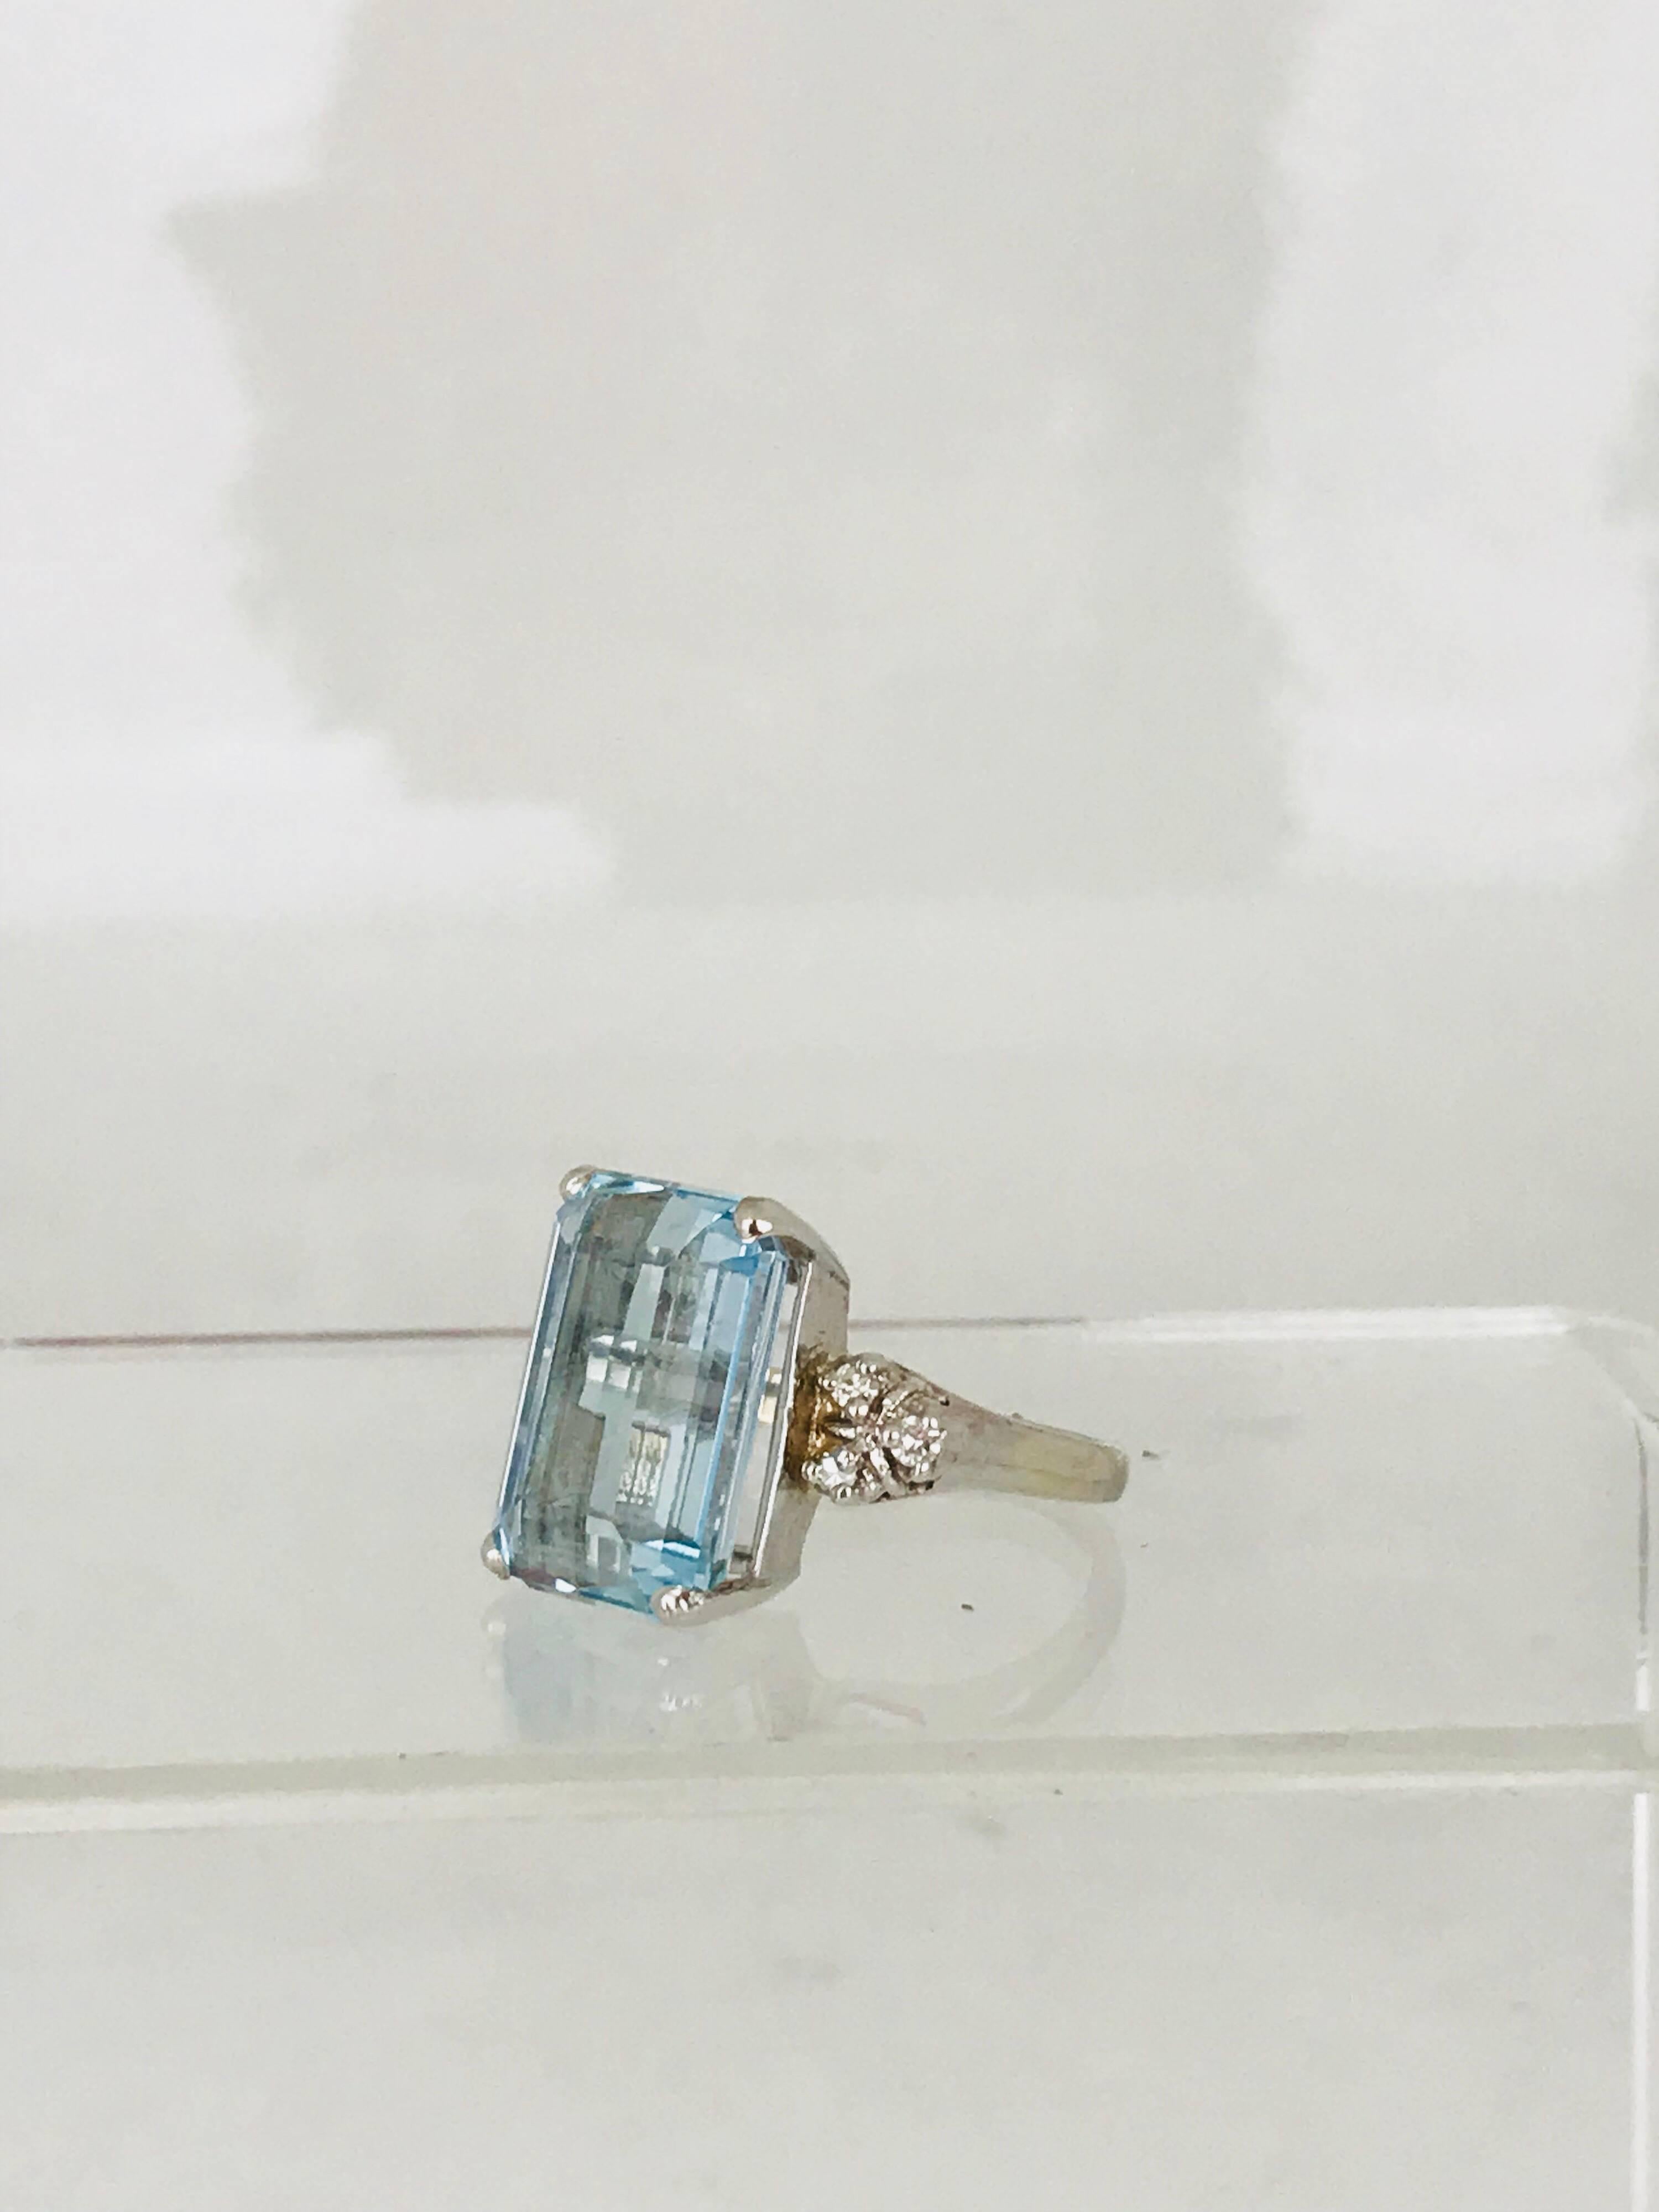 Emerald cut Aquamarine gemstone retro ring  design with accenting diamonds. 
 This ring is circa 1965. The Aquamarine measures 16.04-11.35 x 8.75 millimeters in diameter.  The weight is approximately 13.00 carats.
The ring is accented with (6)